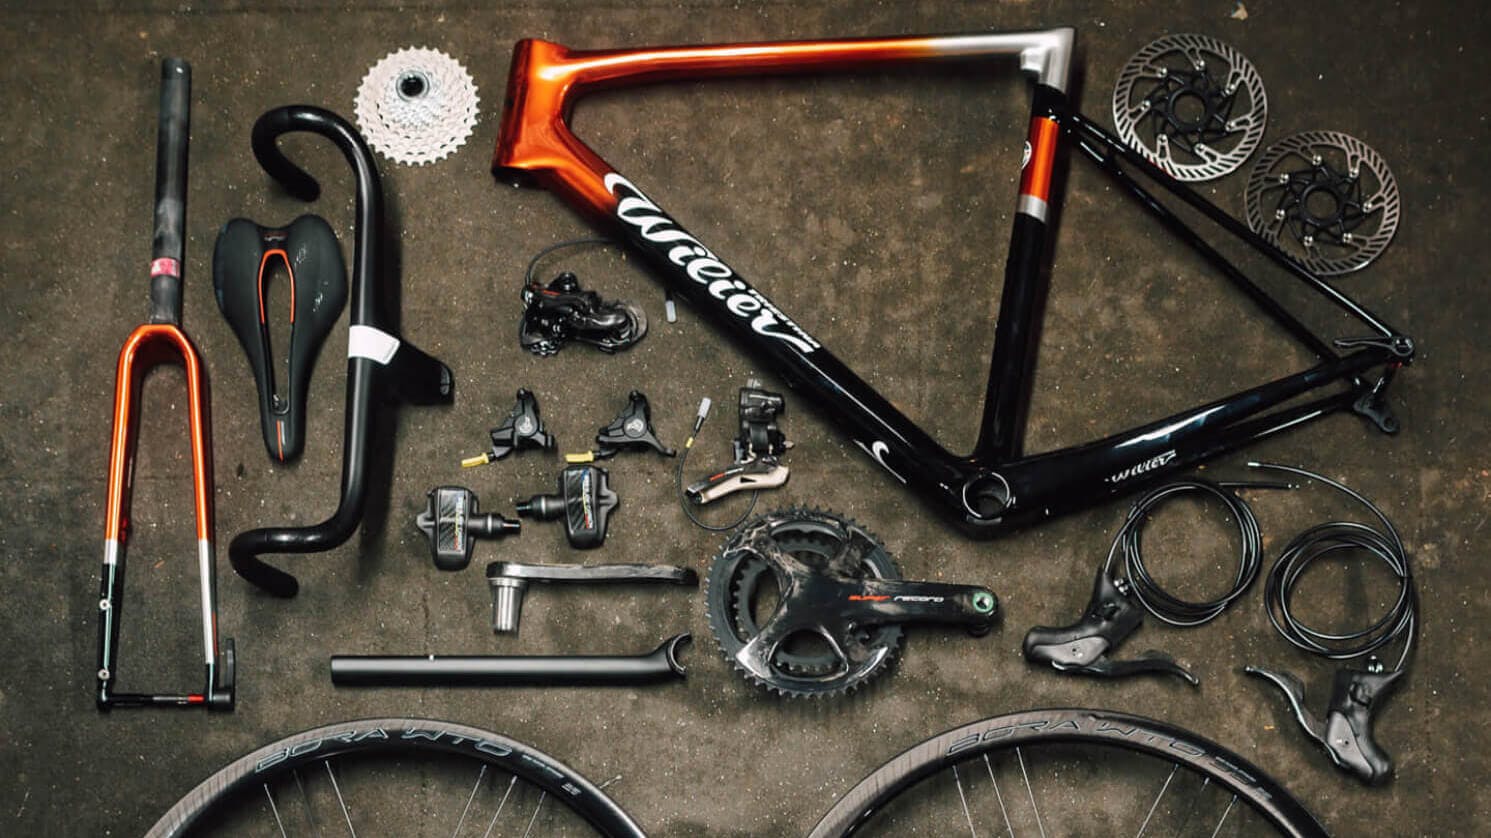 A photo of a dismantled bike with all the components laid out